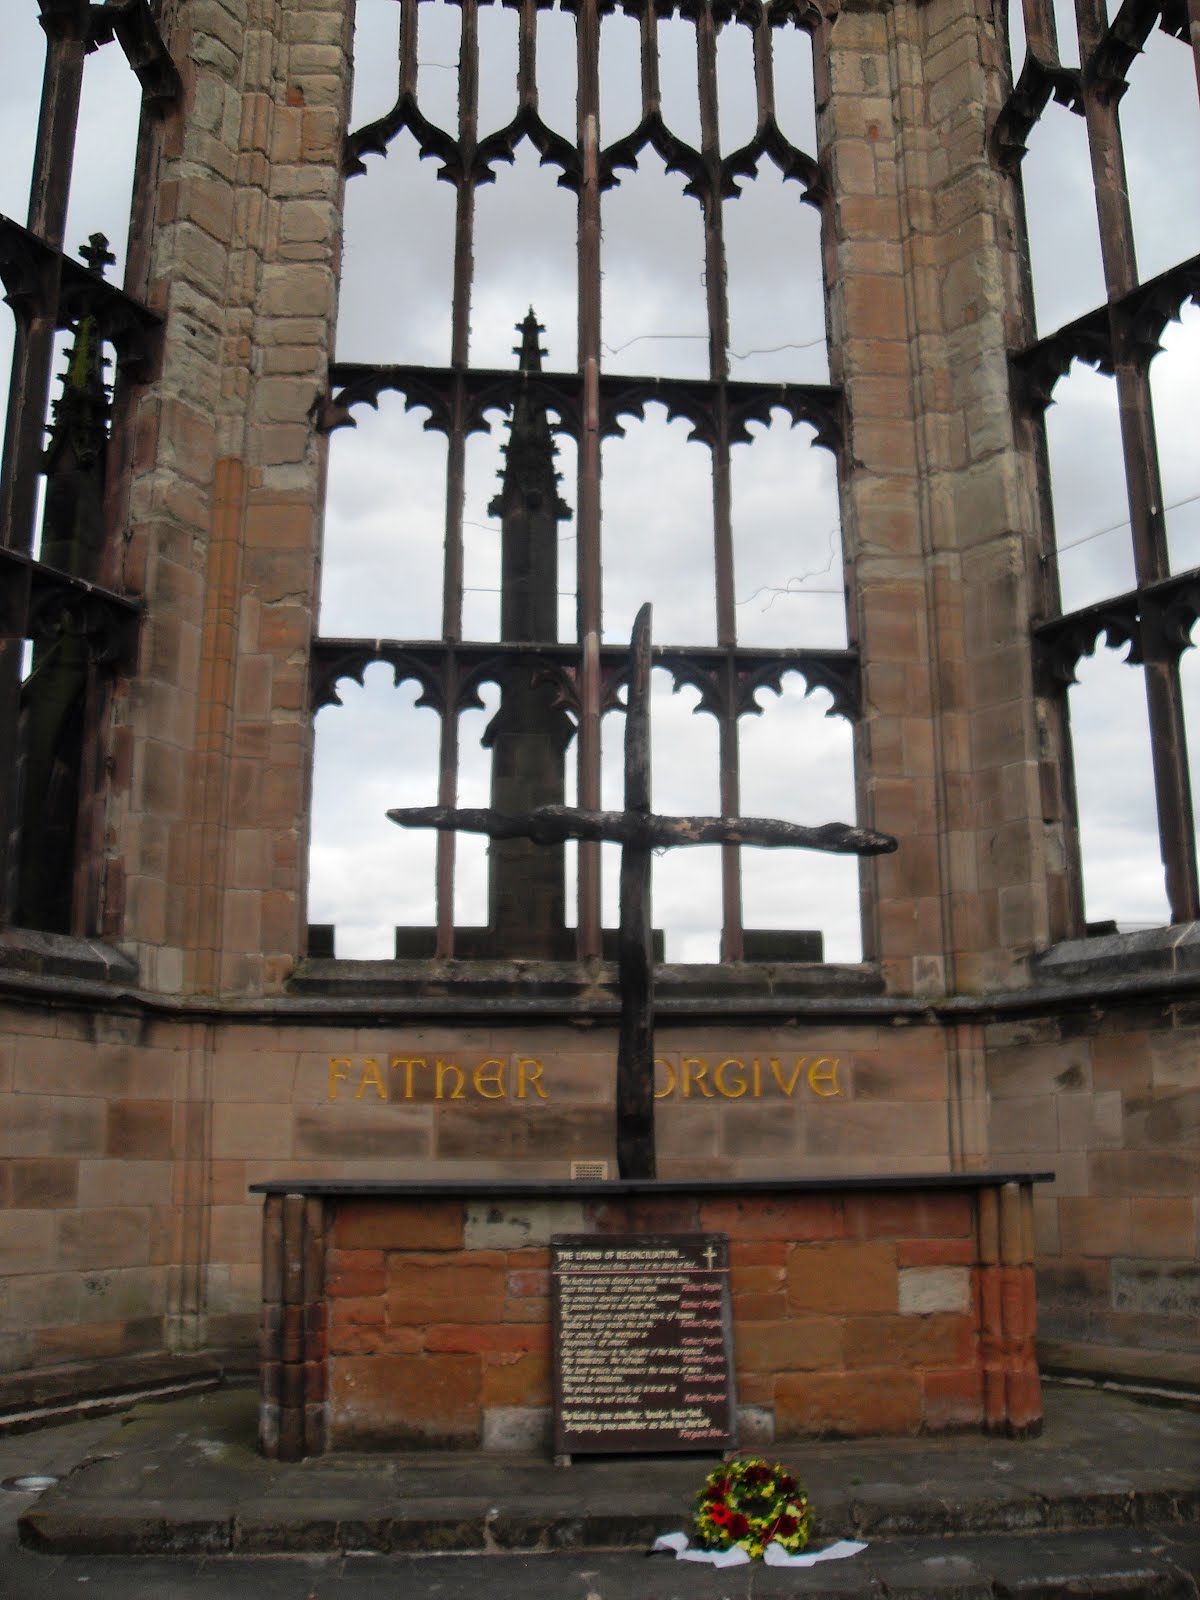 The Cross of Nails in Coventry Cathedral (Photograph; Patrick Comerford, 2011)